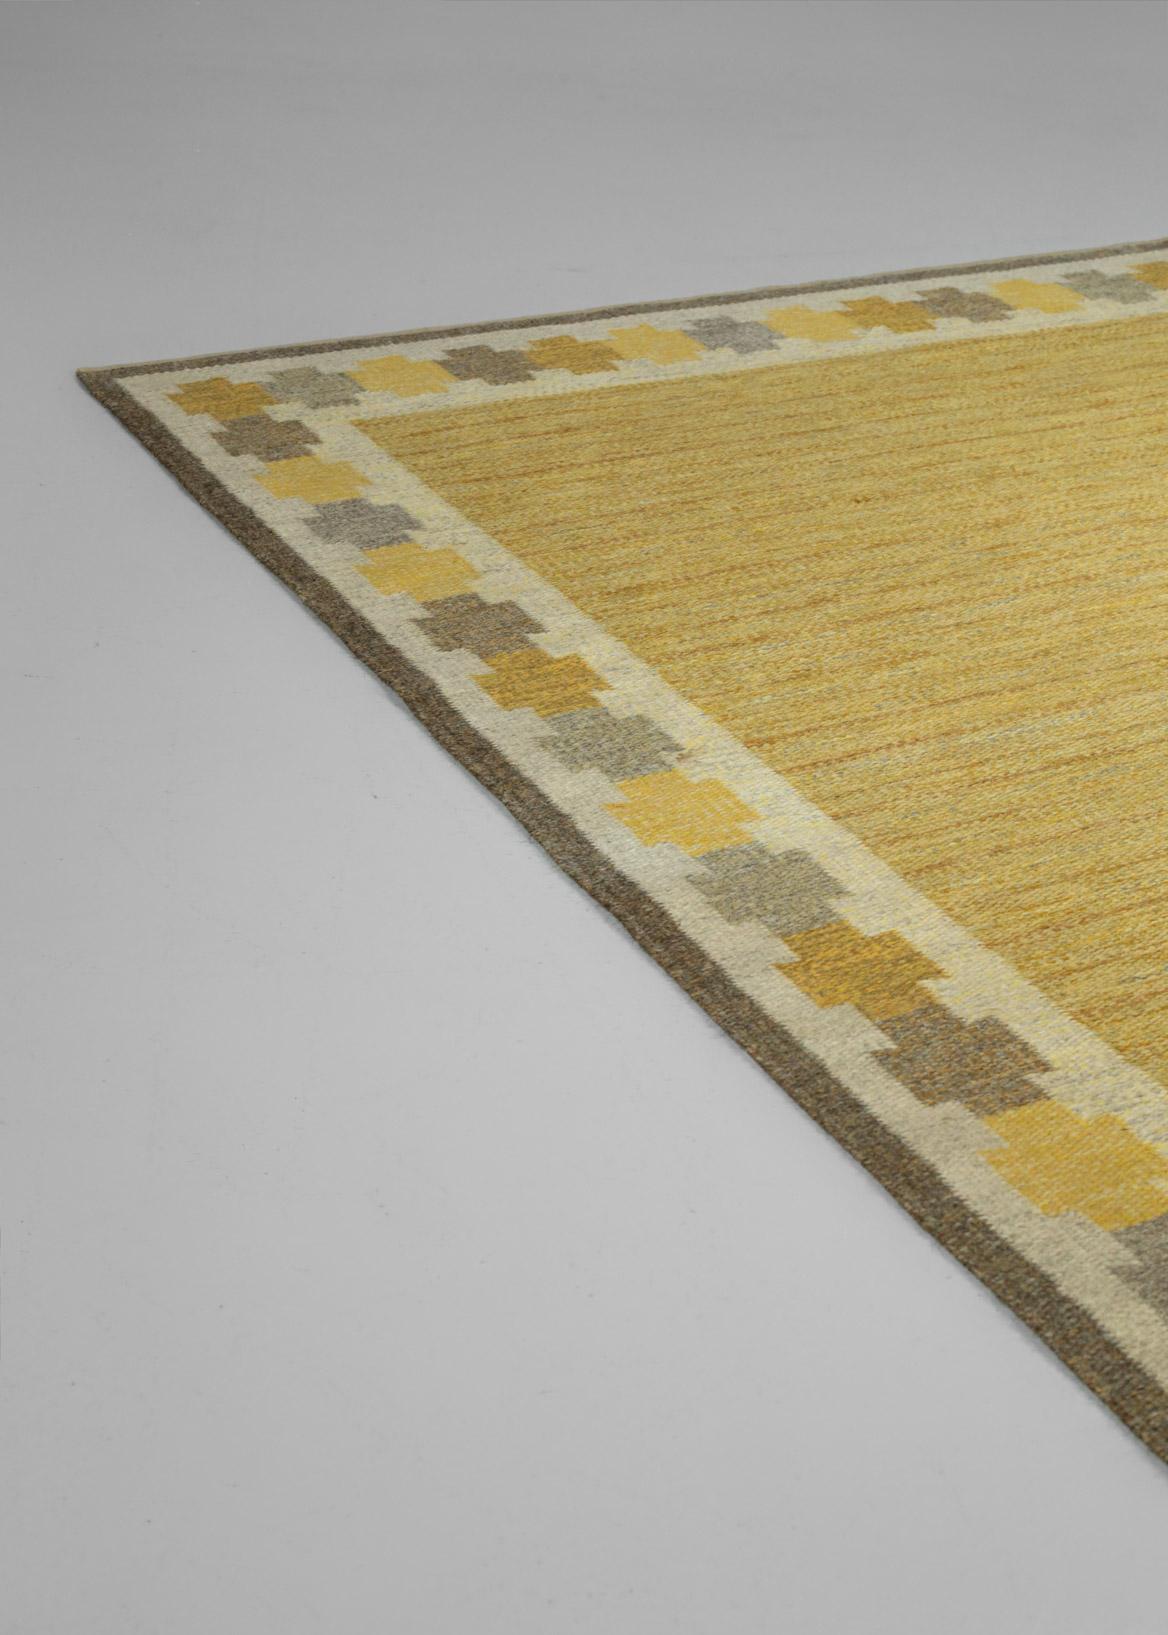 Wool Scandinavian Hand Woven Rug from Ingegerd Silow from the 60's For Sale